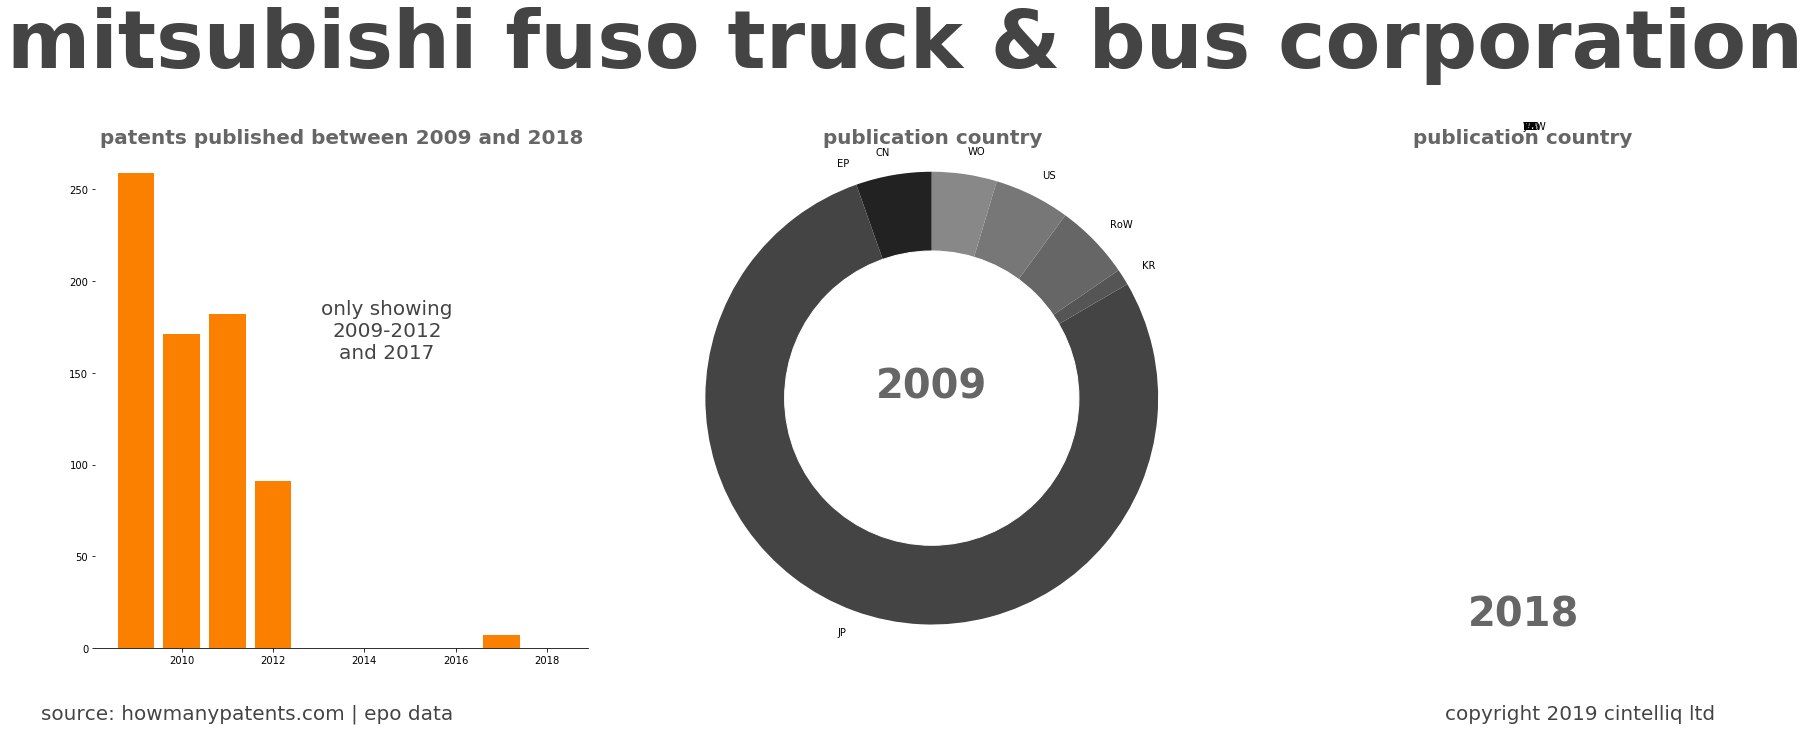 summary of patents for Mitsubishi Fuso Truck & Bus Corporation